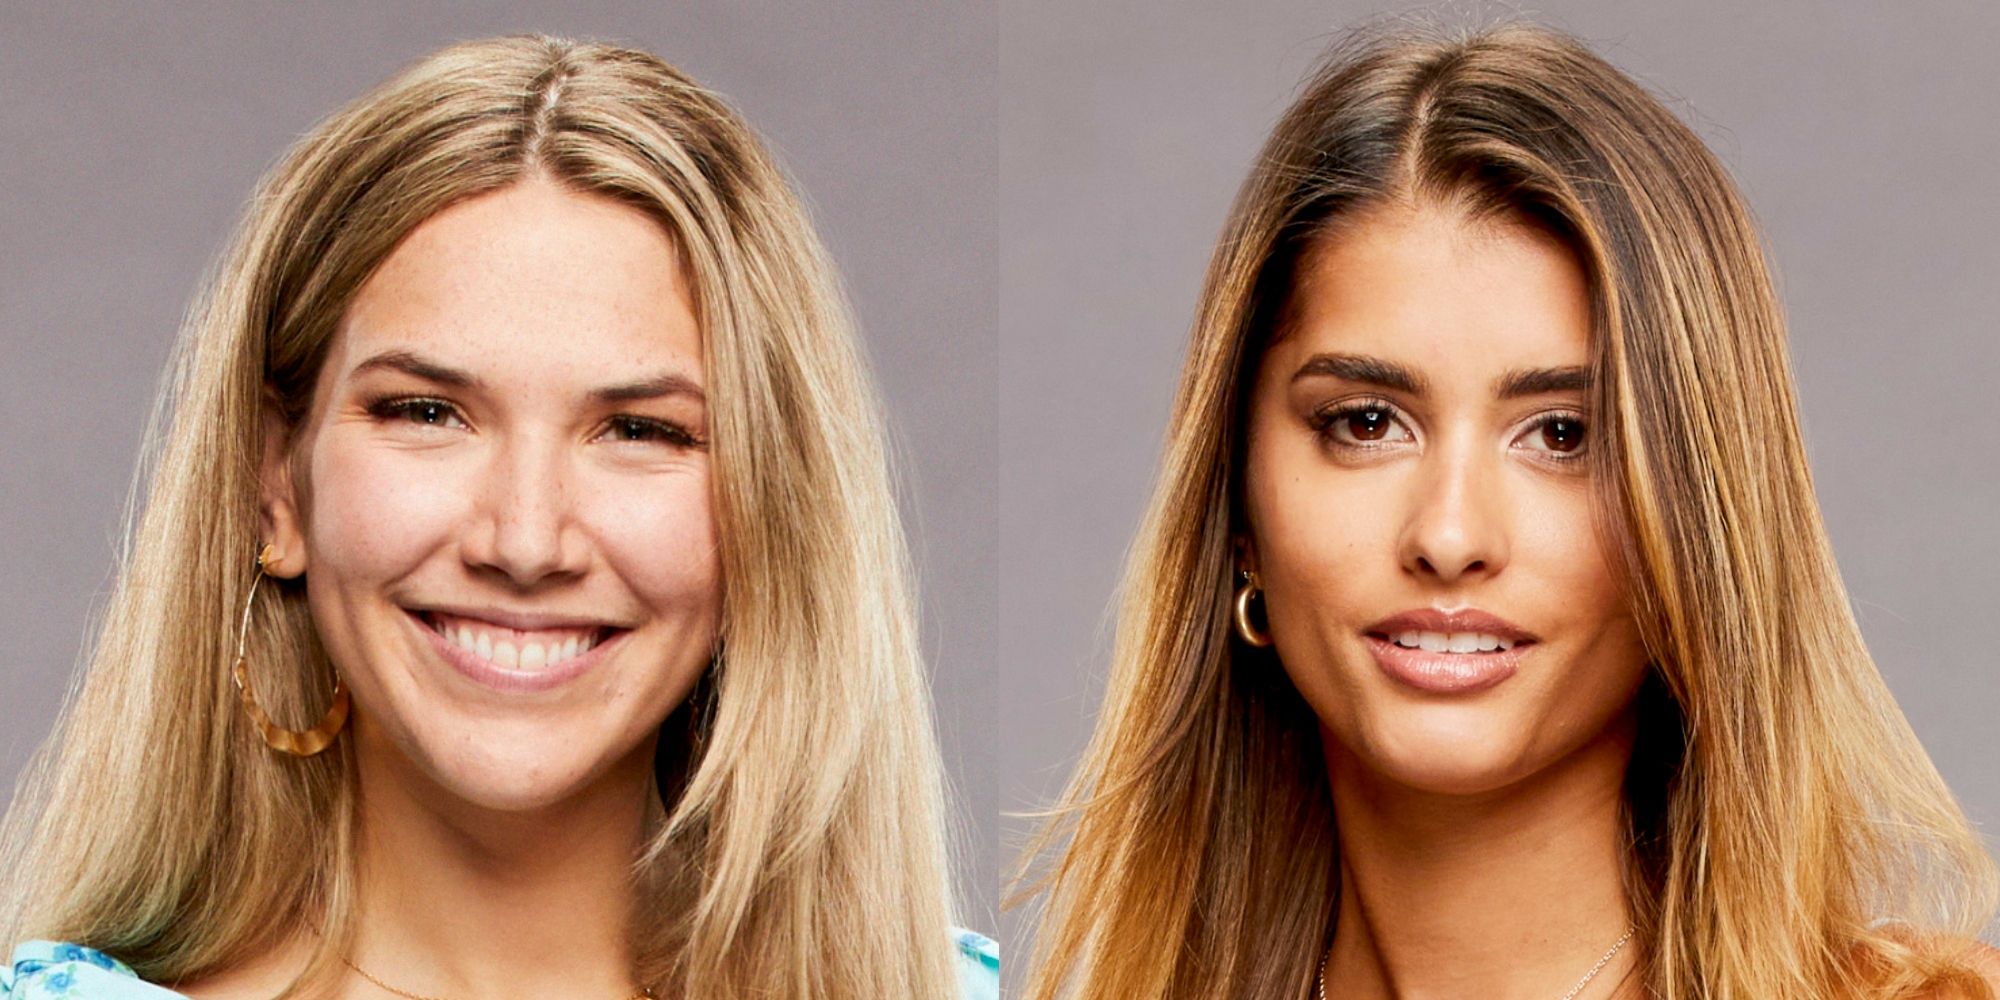 Claire Rehfuss and Alyssa Lopez on Big Brother 23